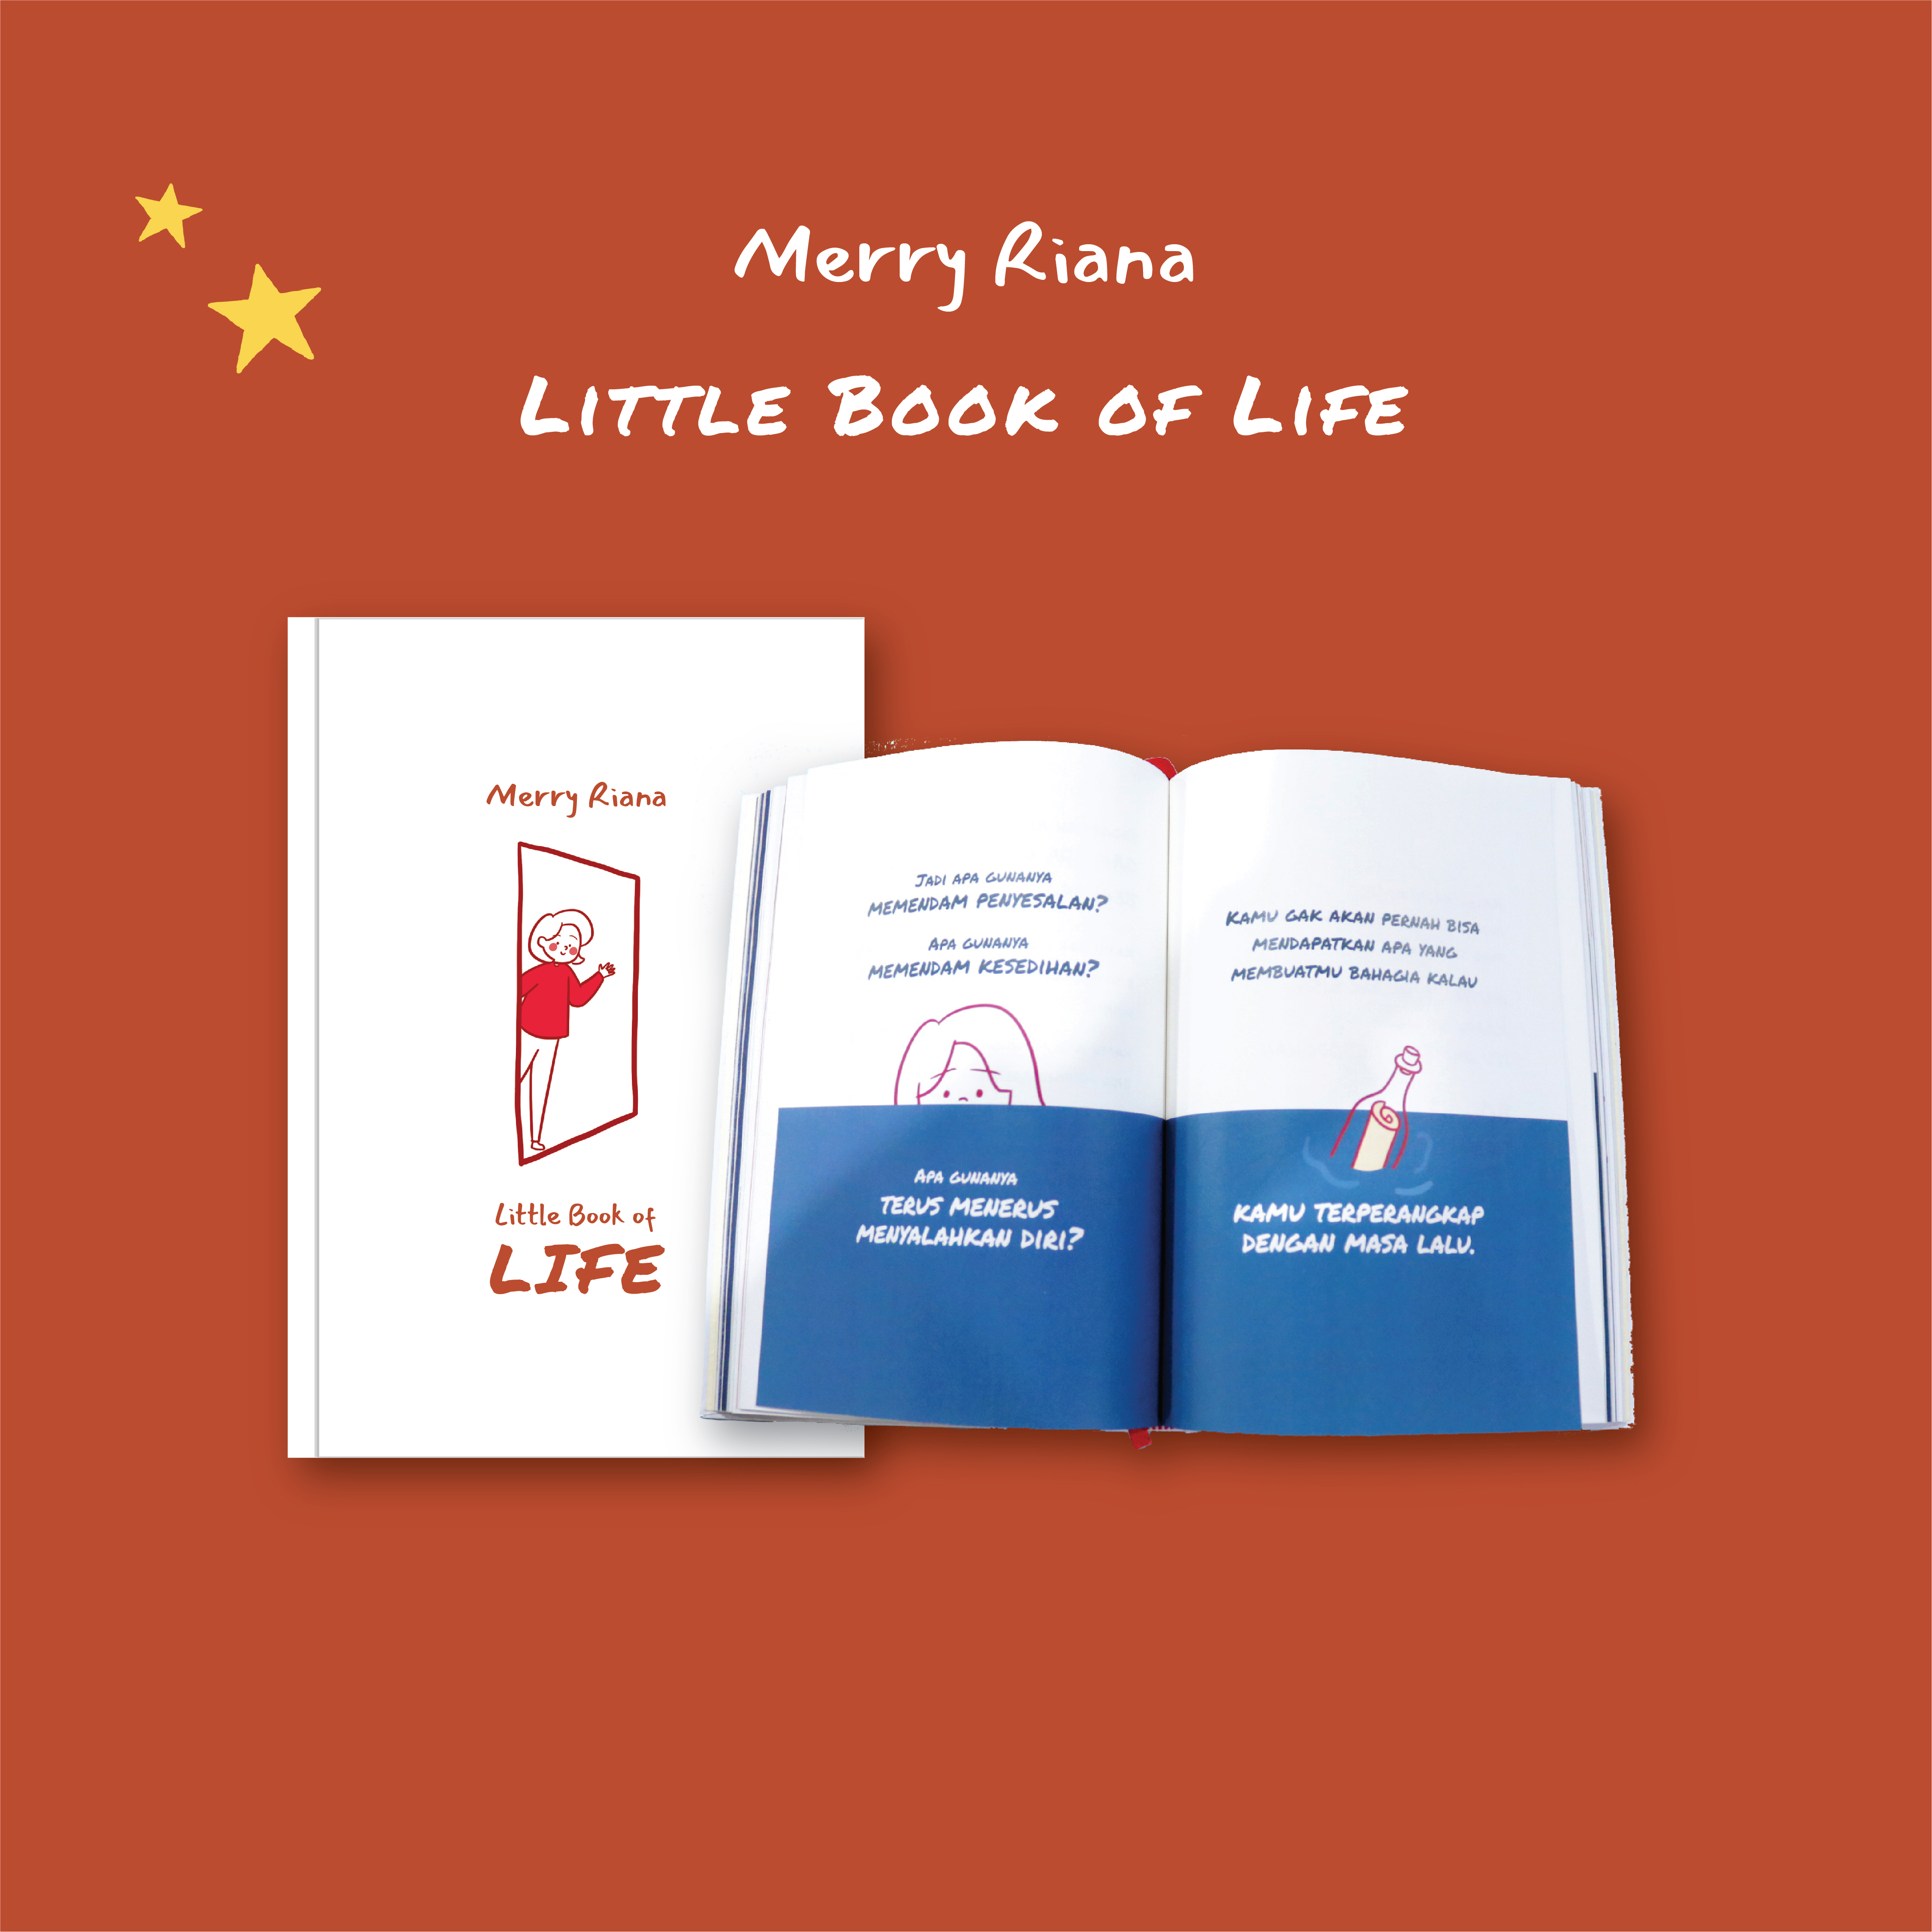 Merry Riana Little Book Of Life